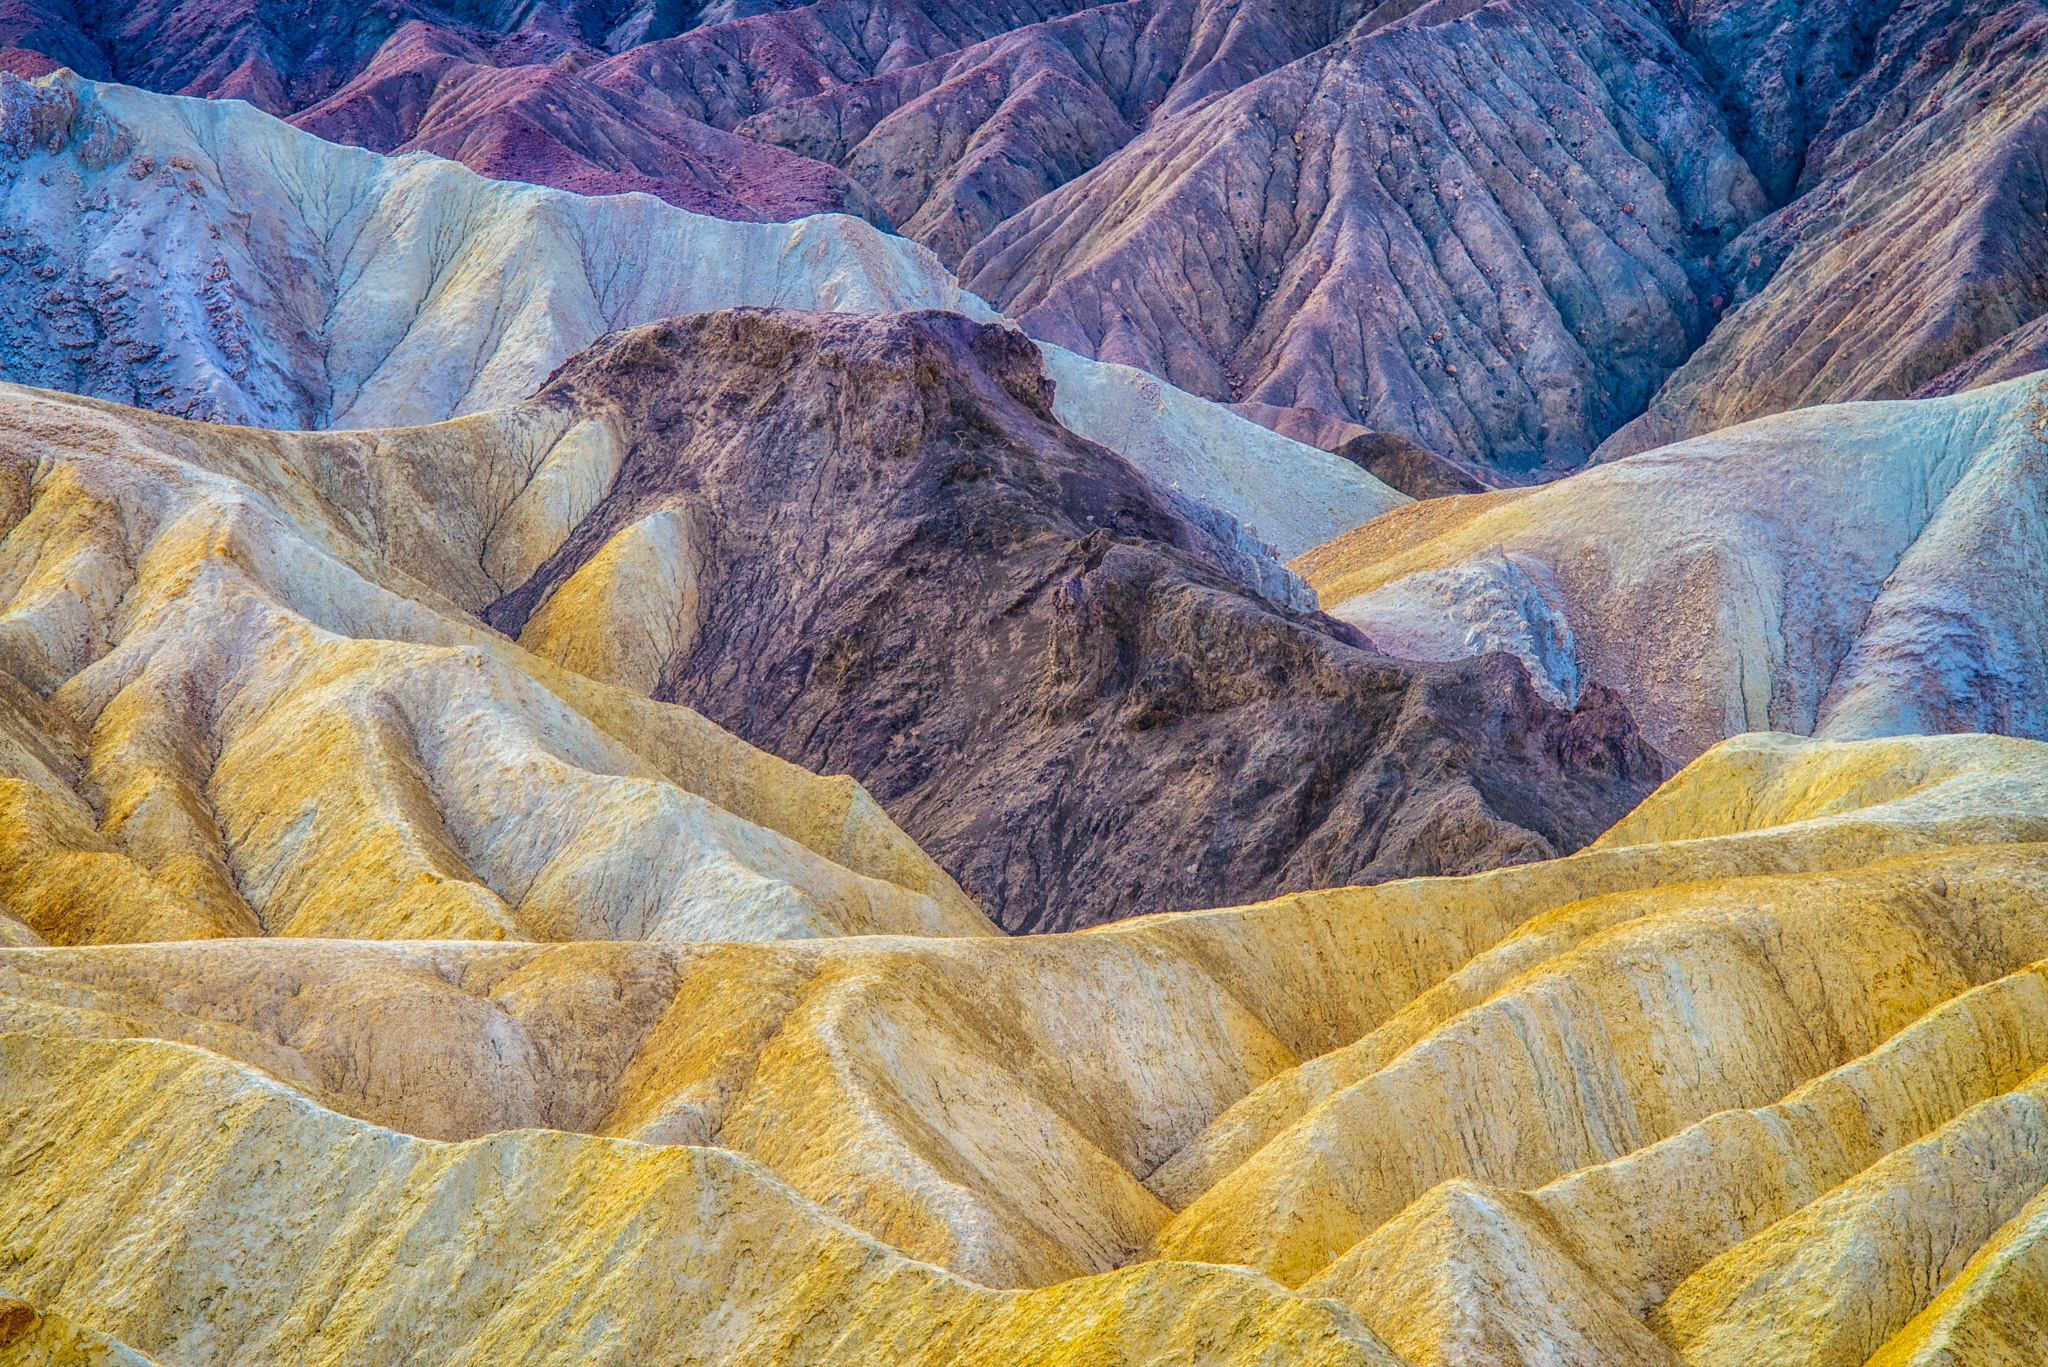 This is a close-up view of the margin between the yellow Furnace Creek Formation and the multi-colored Artist's Drive formation visible from Zabriskie Point Overlook, which is accessible from Highway 190 in Death Valley National Park.